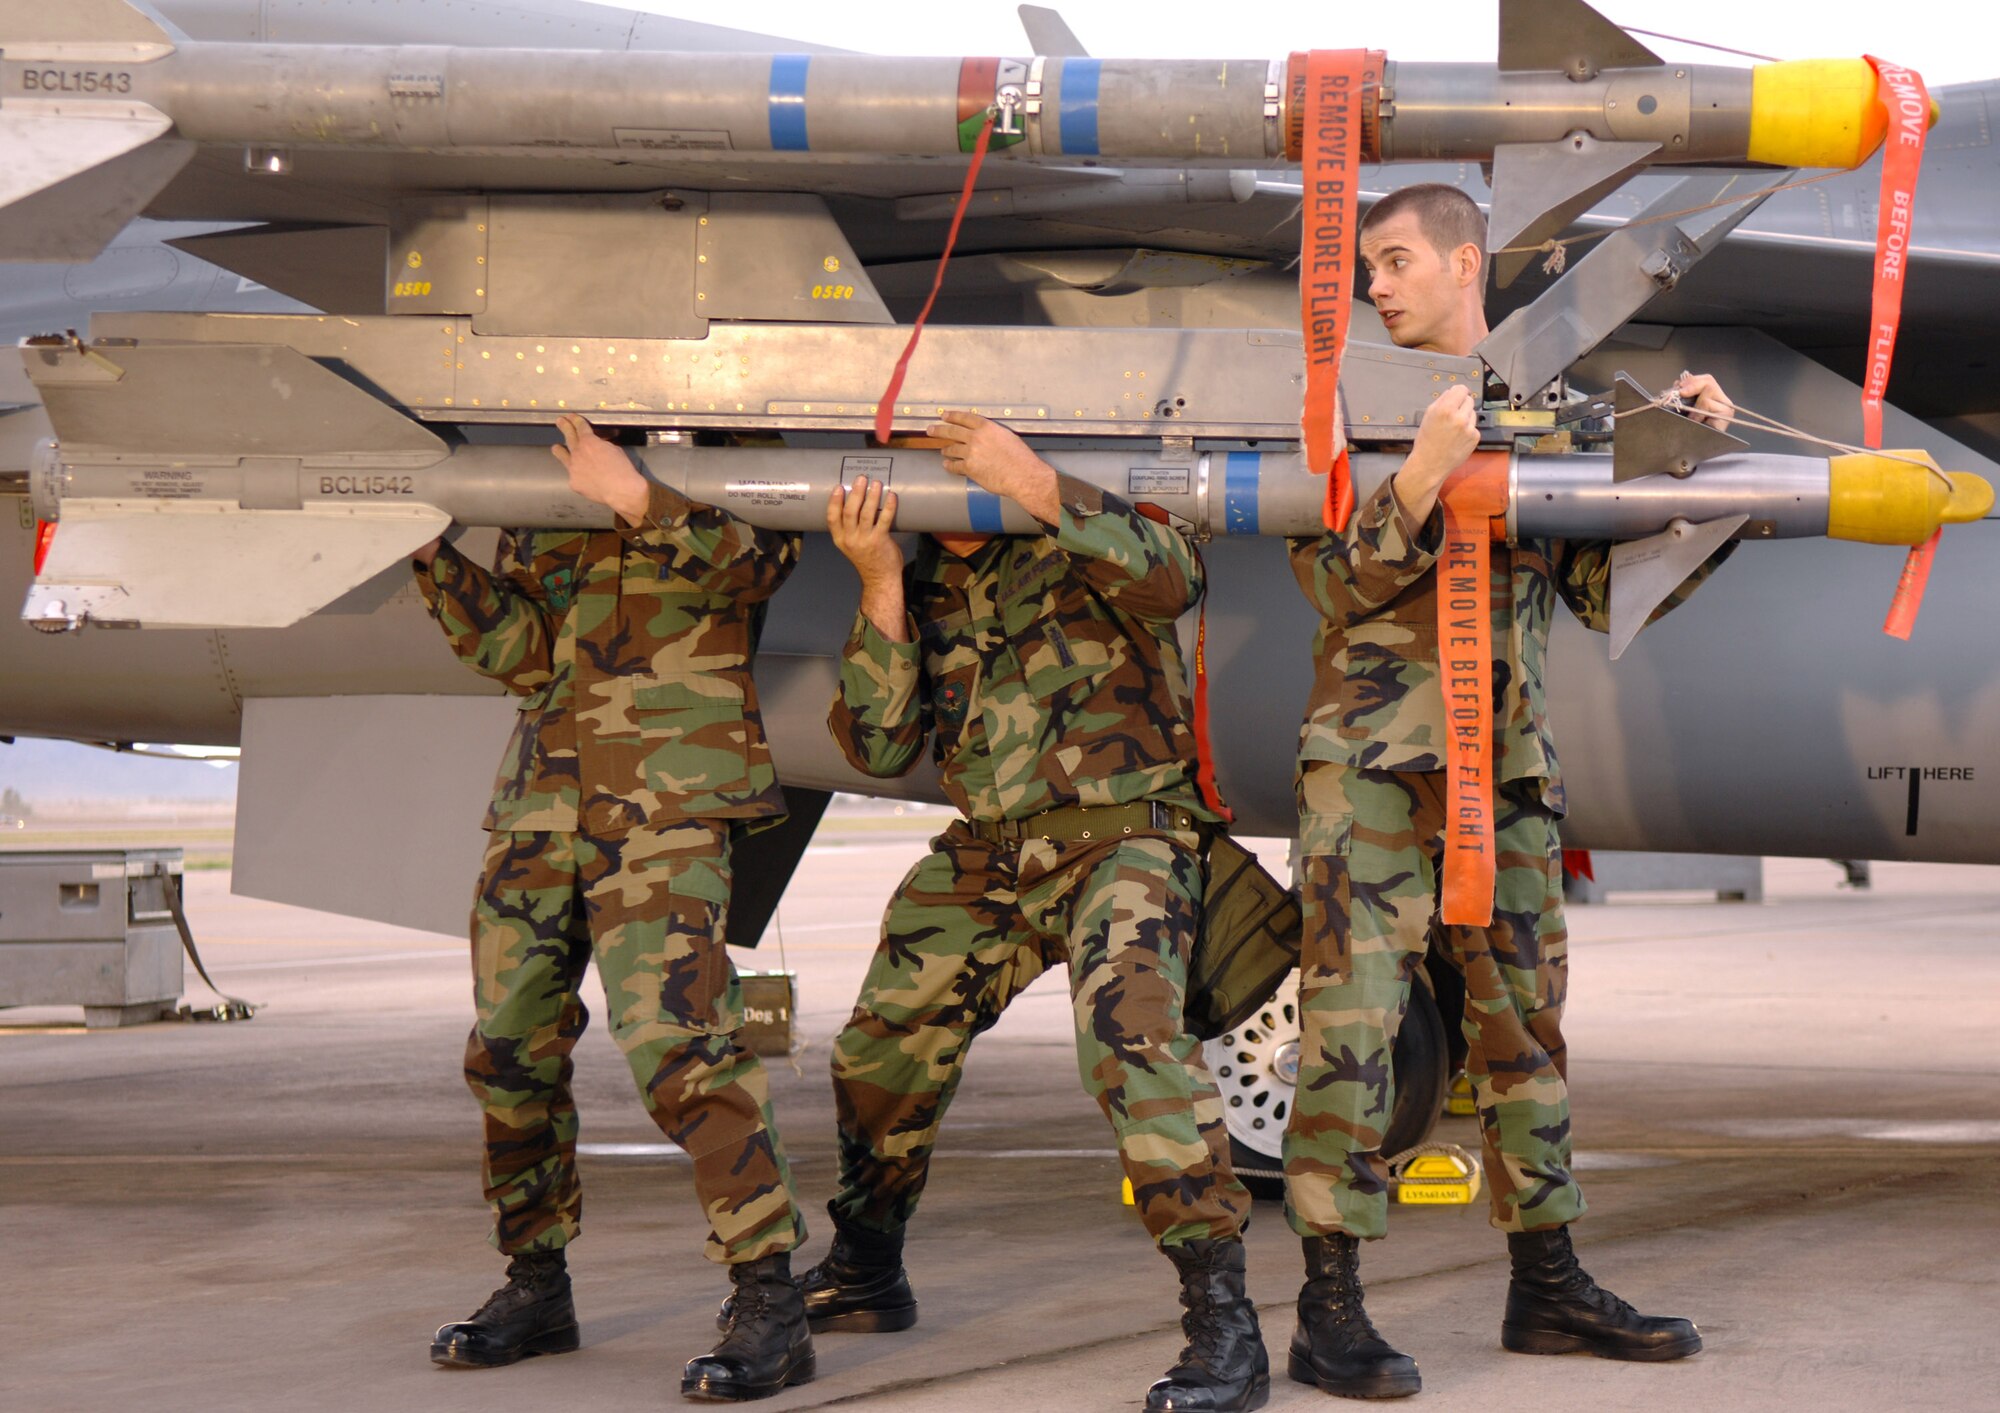 (From left) Senior Airman David Foster, Tech. Sgt. Greg Goodro and Staff Sgt. Cameron Linegar load an AIM-9 onto the wing of an F-16C Fighting Falcon during Good Morning Arizona, a morning show filmed at Luke Air Force Base, Ariz., March 22. The show featured demonstrations from different career fields throughout the Air Force and helped promote Air Force Week. (U.S. Air Force photo/Staff Sgt. Brian Ferguson)